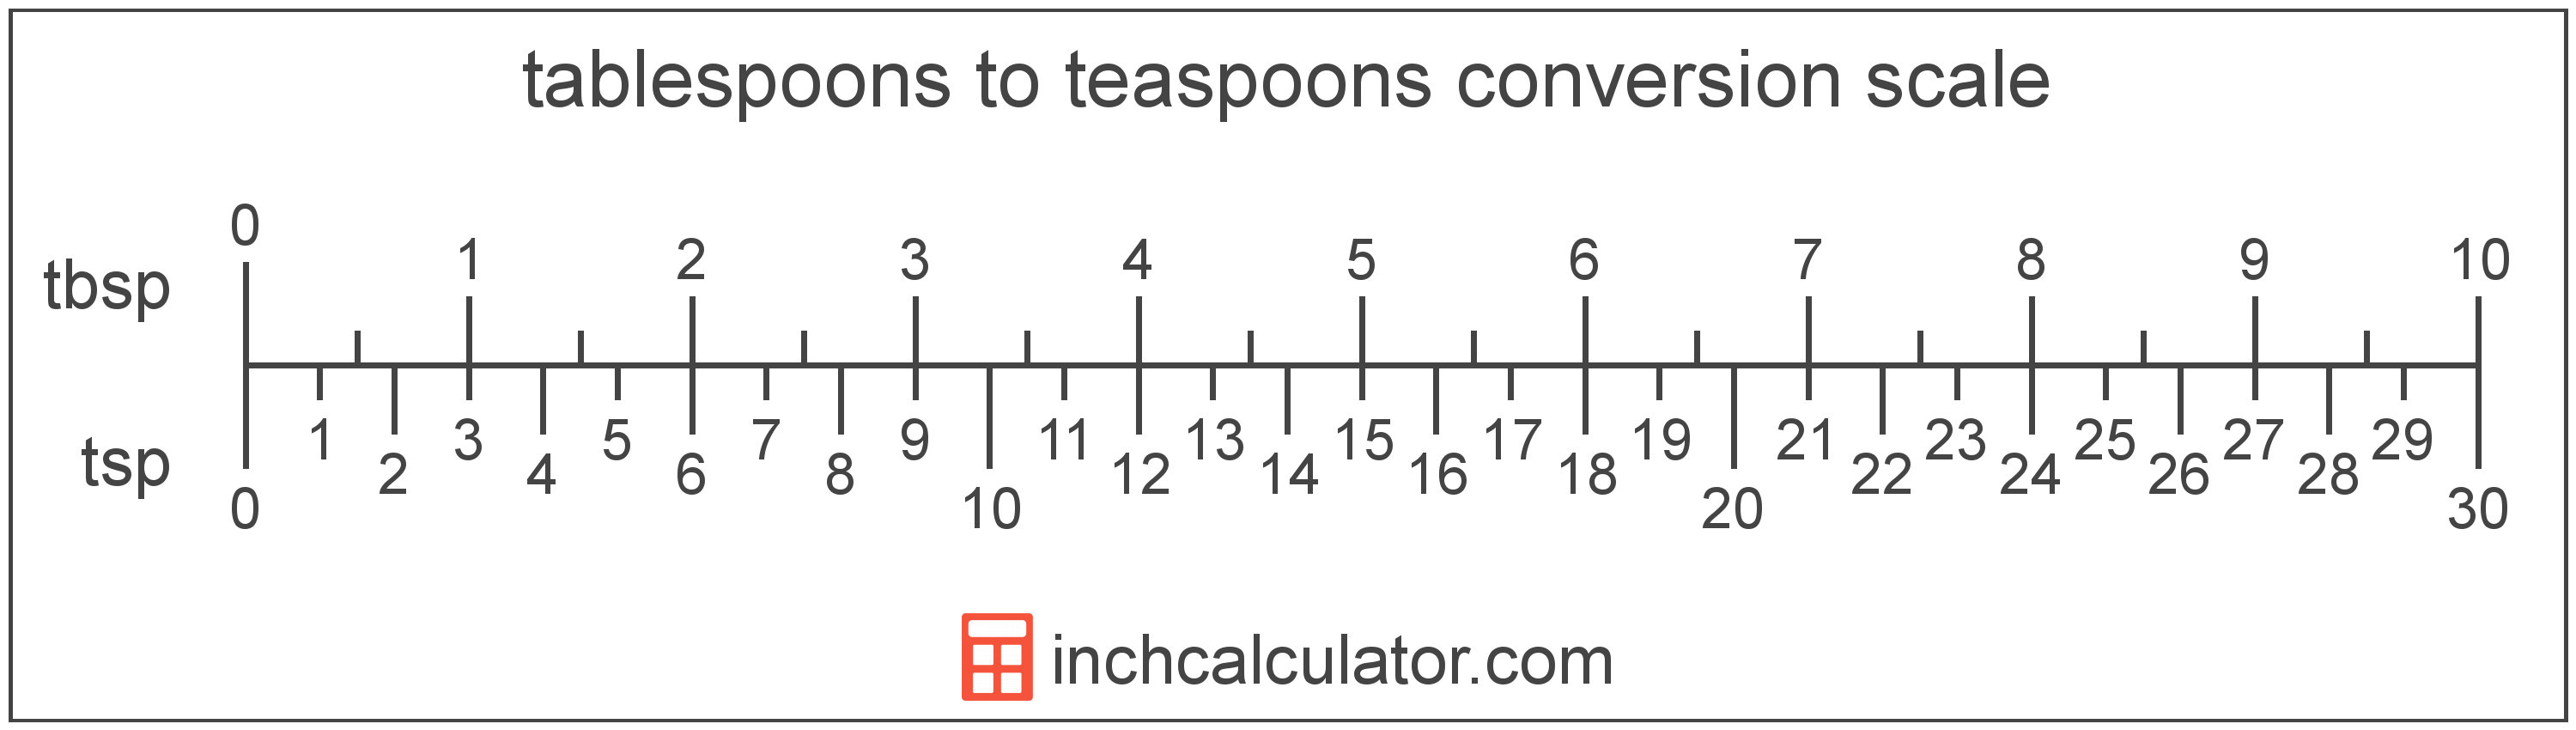 Tablespoons to Teaspoons Conversion (tbsp to tsp)